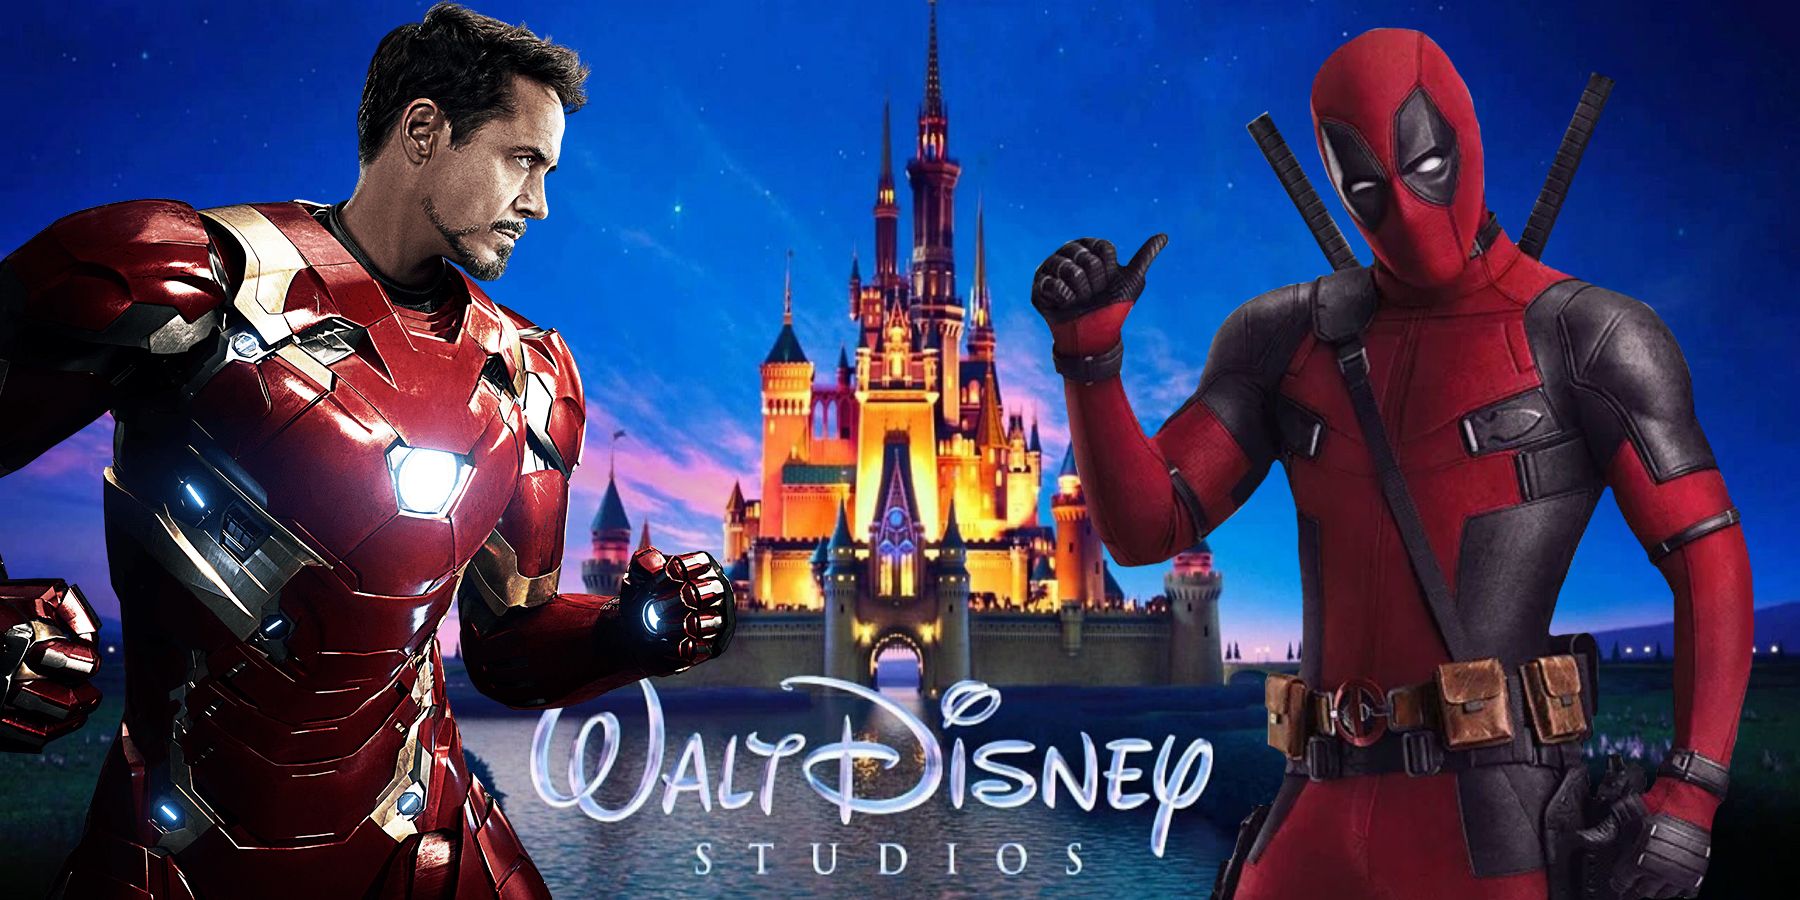 A Complete Timeline Of The DisneyFox Deal